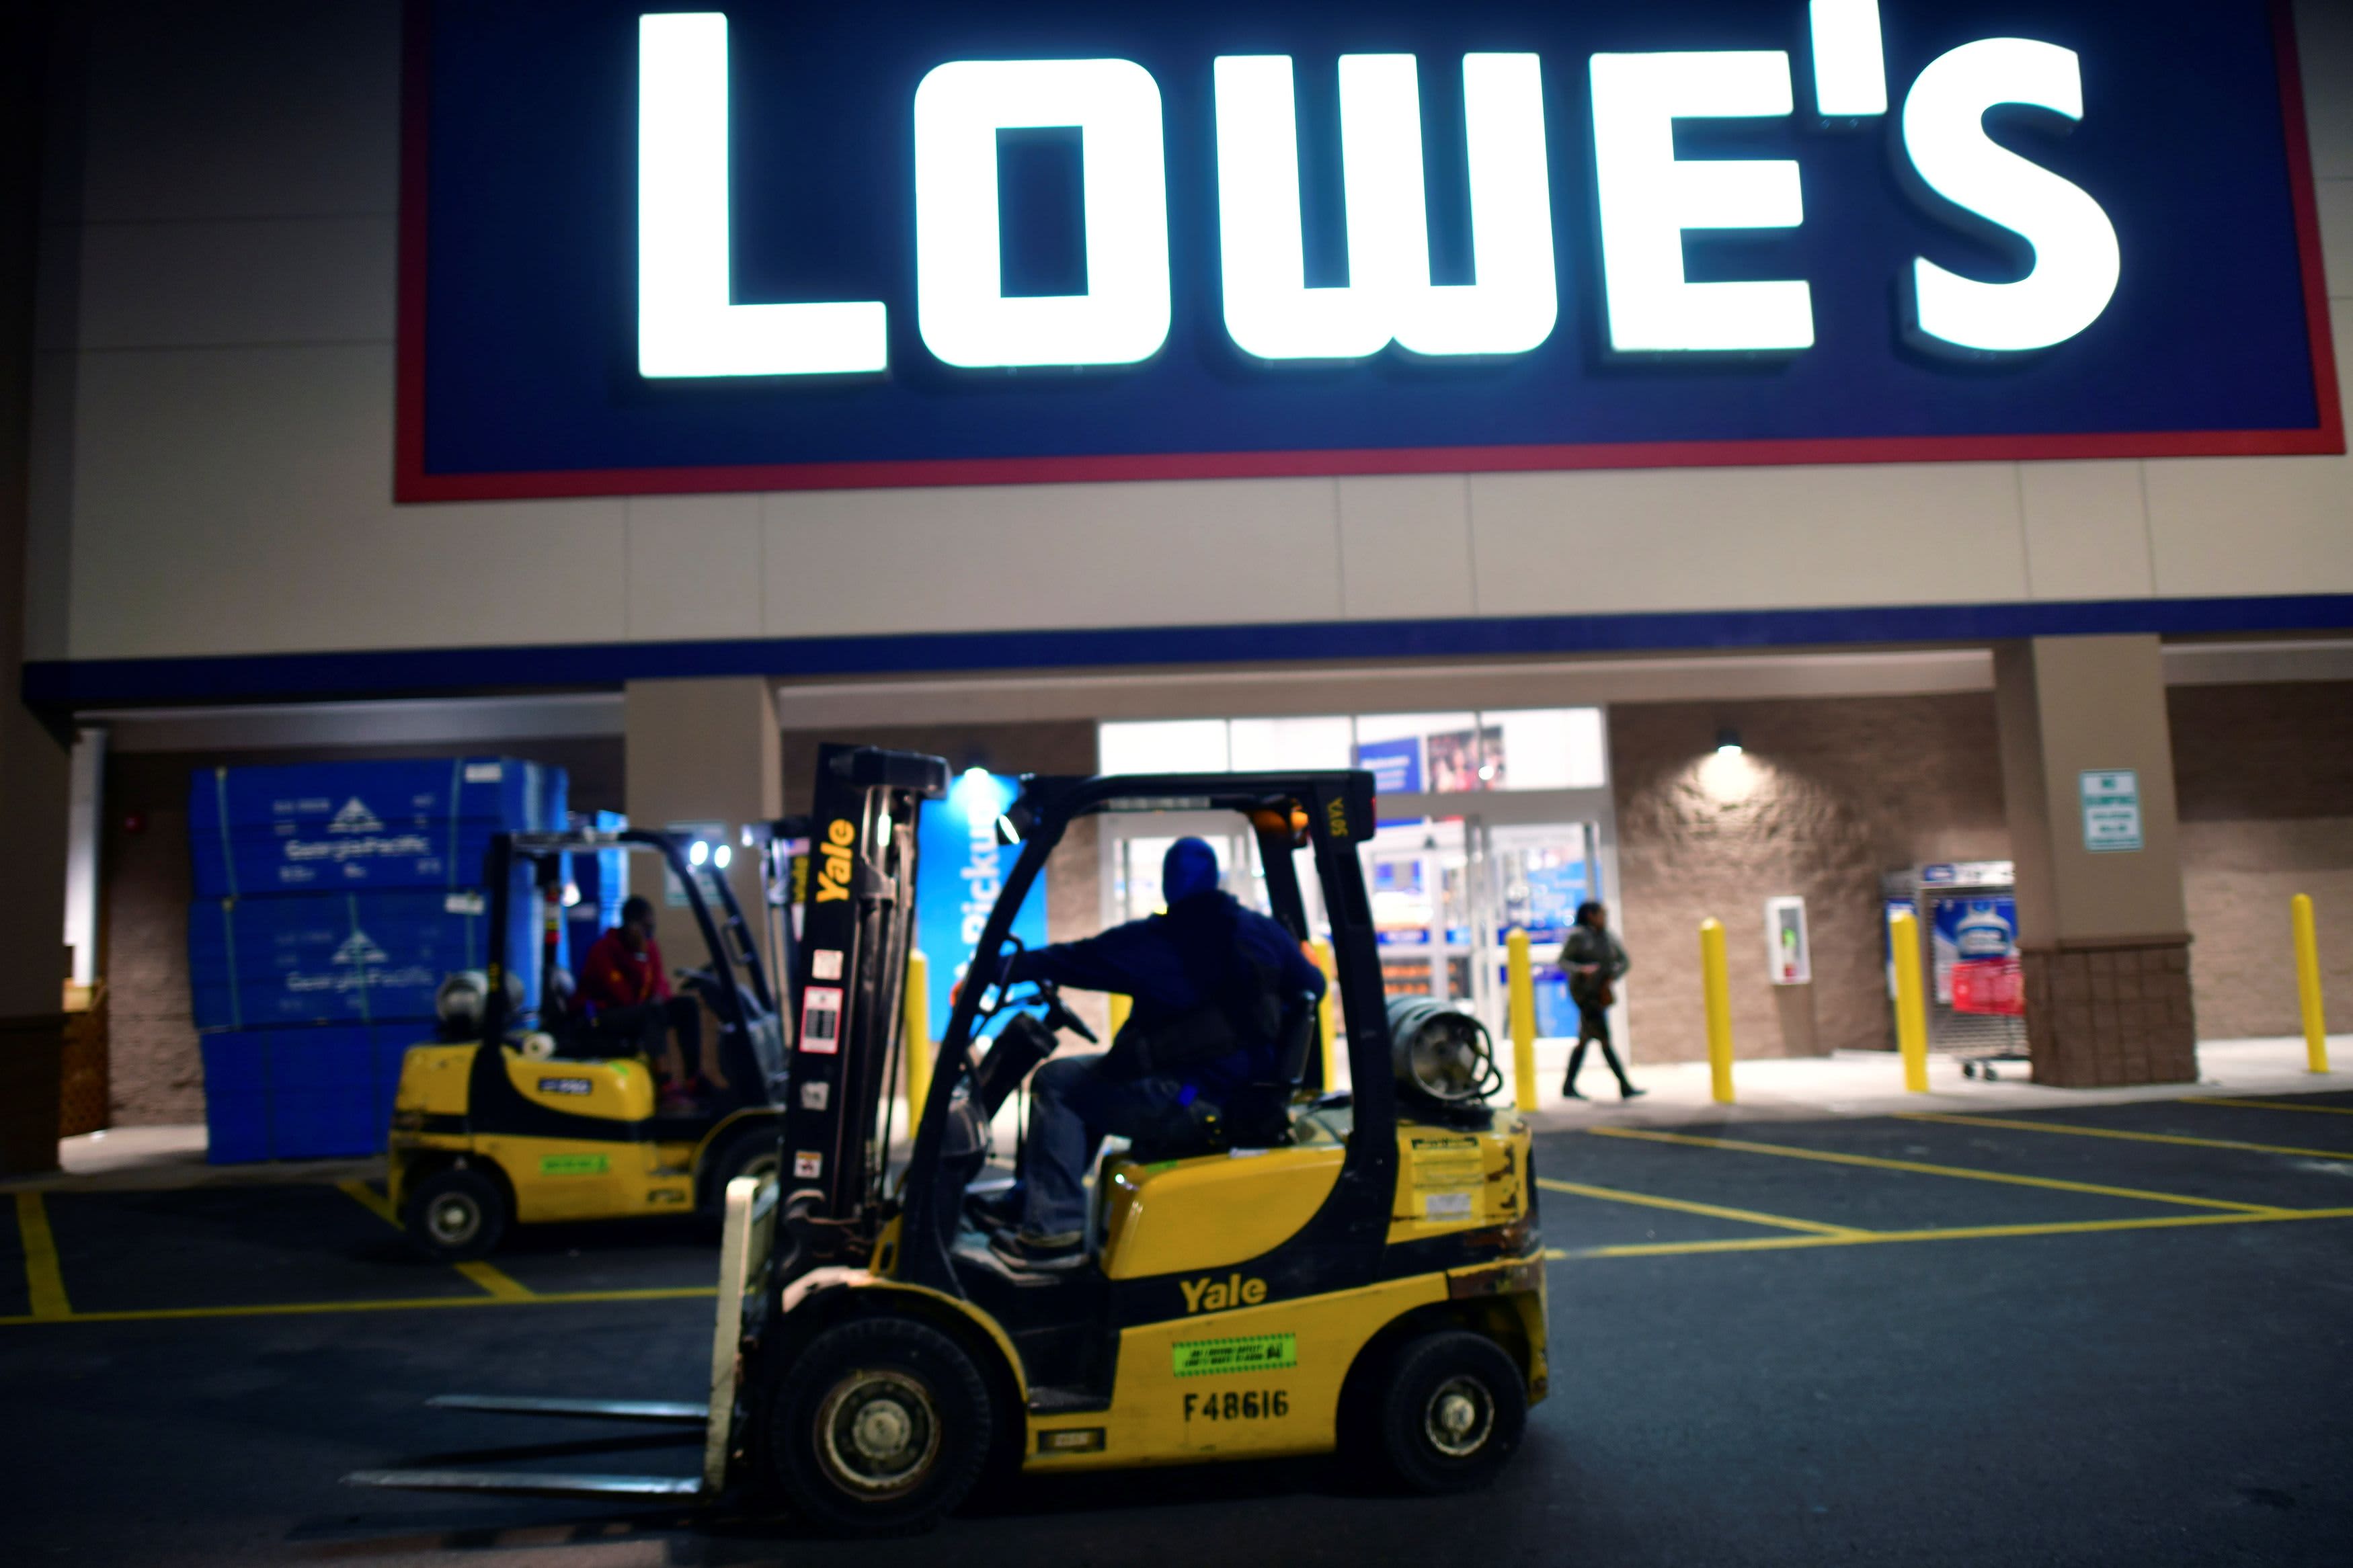 Stocks making the biggest moves midday: Lowe's, MicroStrategy, Six Flags, Casper Sleep & more - CNBC